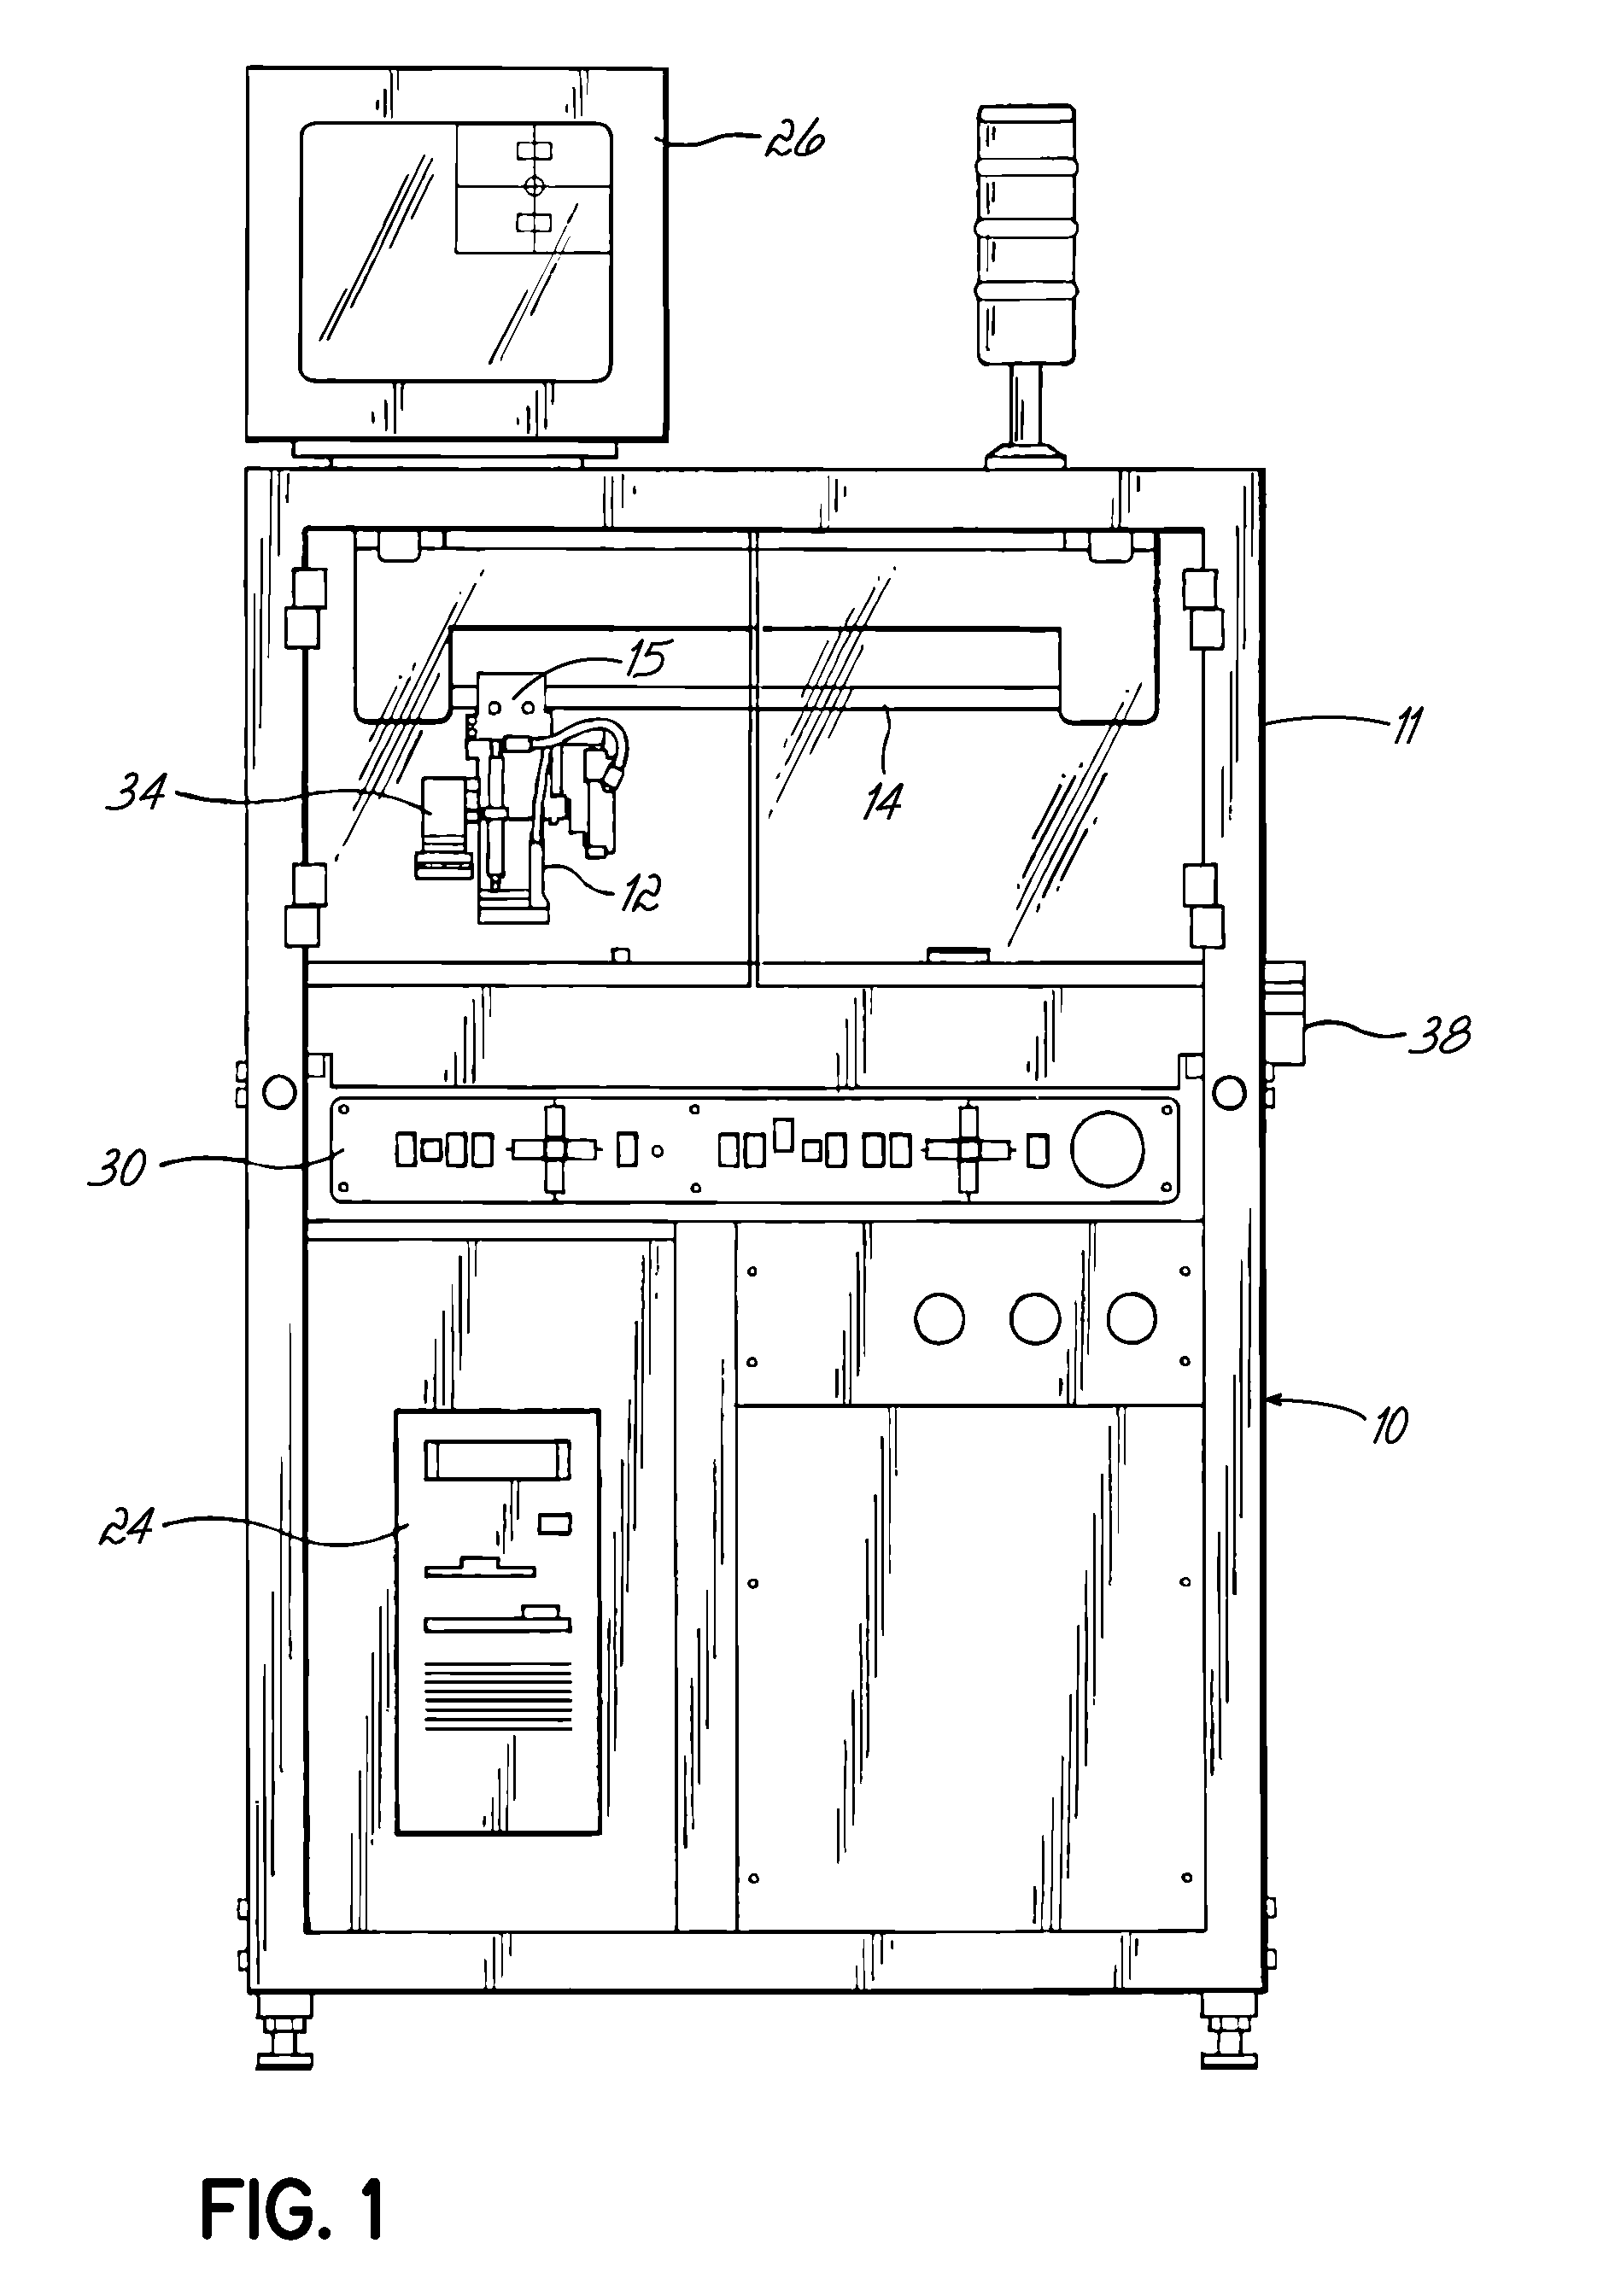 Methods for continuously moving a fluid dispenser while dispensing amounts of a fluid material